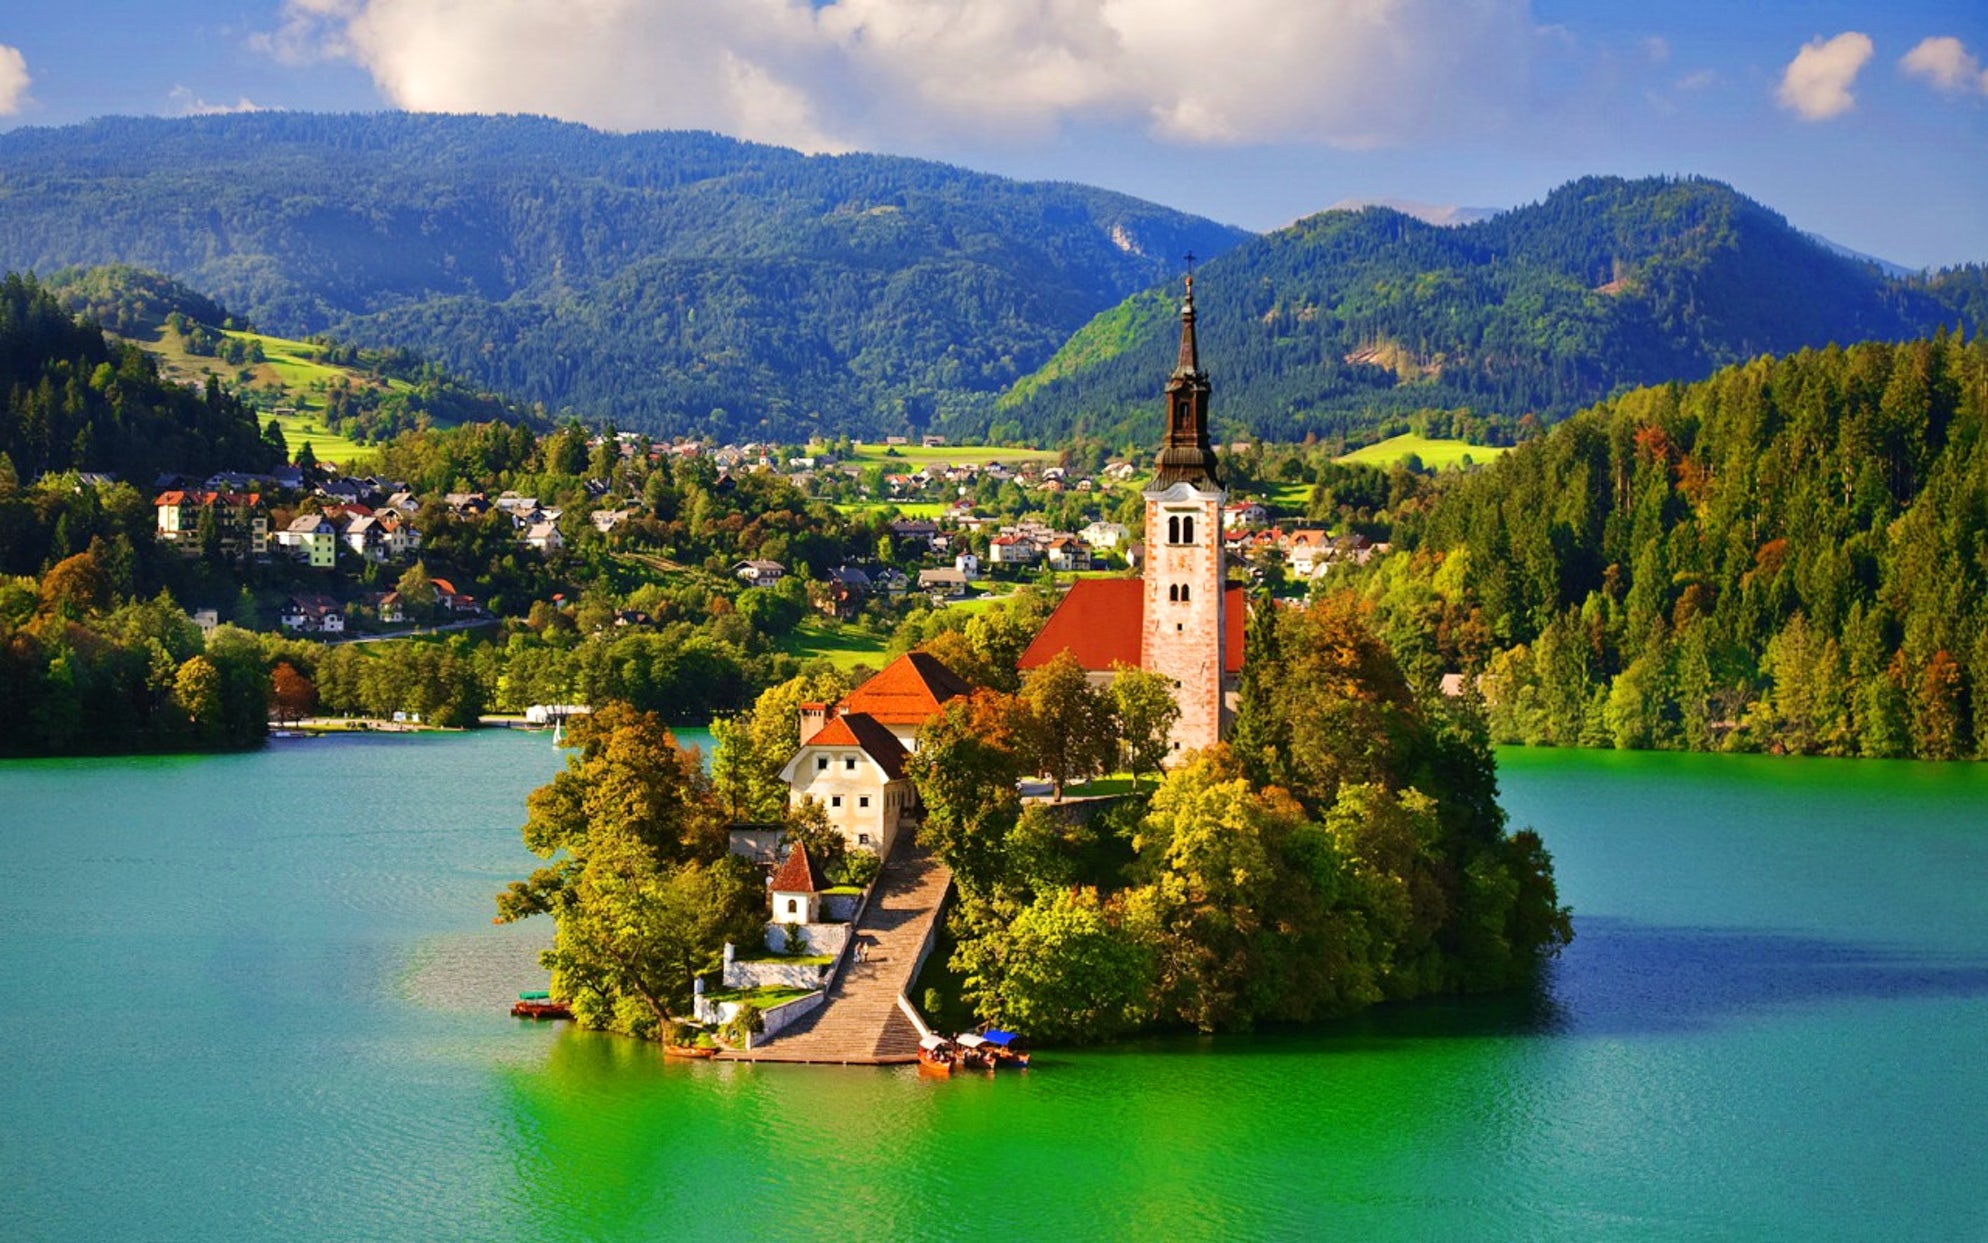 Lake Bled, Slovenia - Europe's 10 Most Stunning Lakes